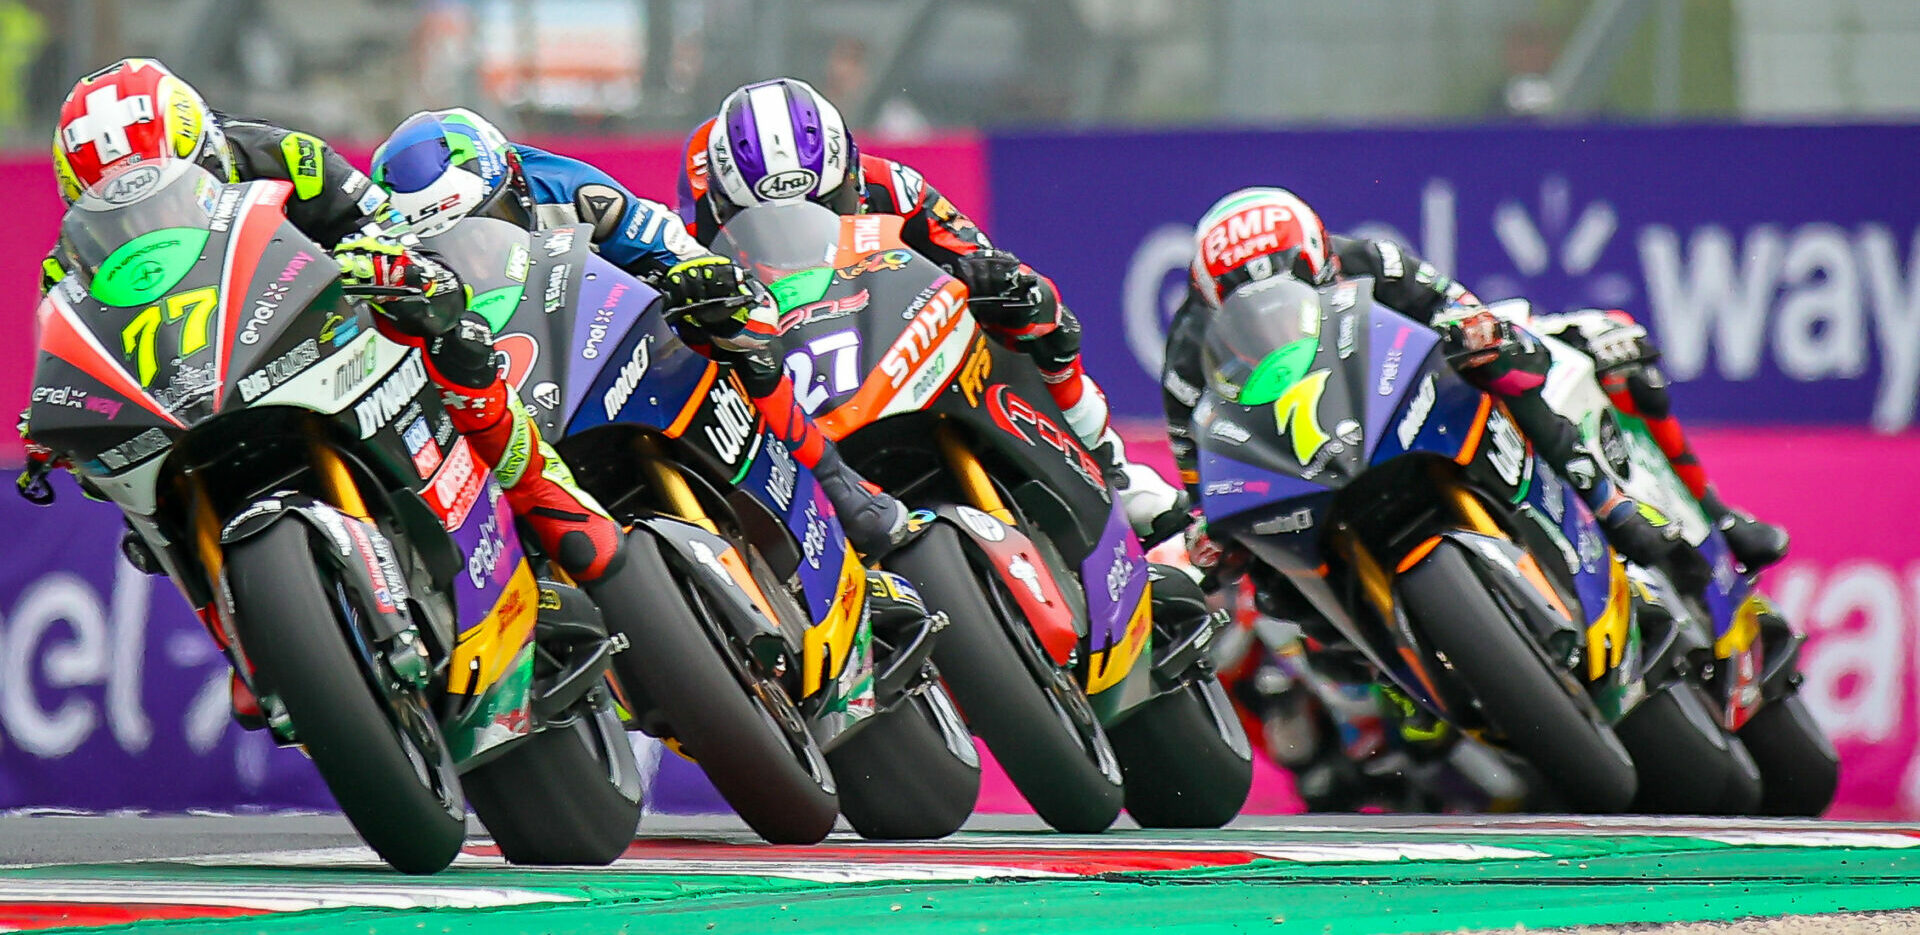 The FIM MotoE World Cup resumes this weekend at the Red Bull Ring, in Austria. Photo courtesy Energica and Dorna.